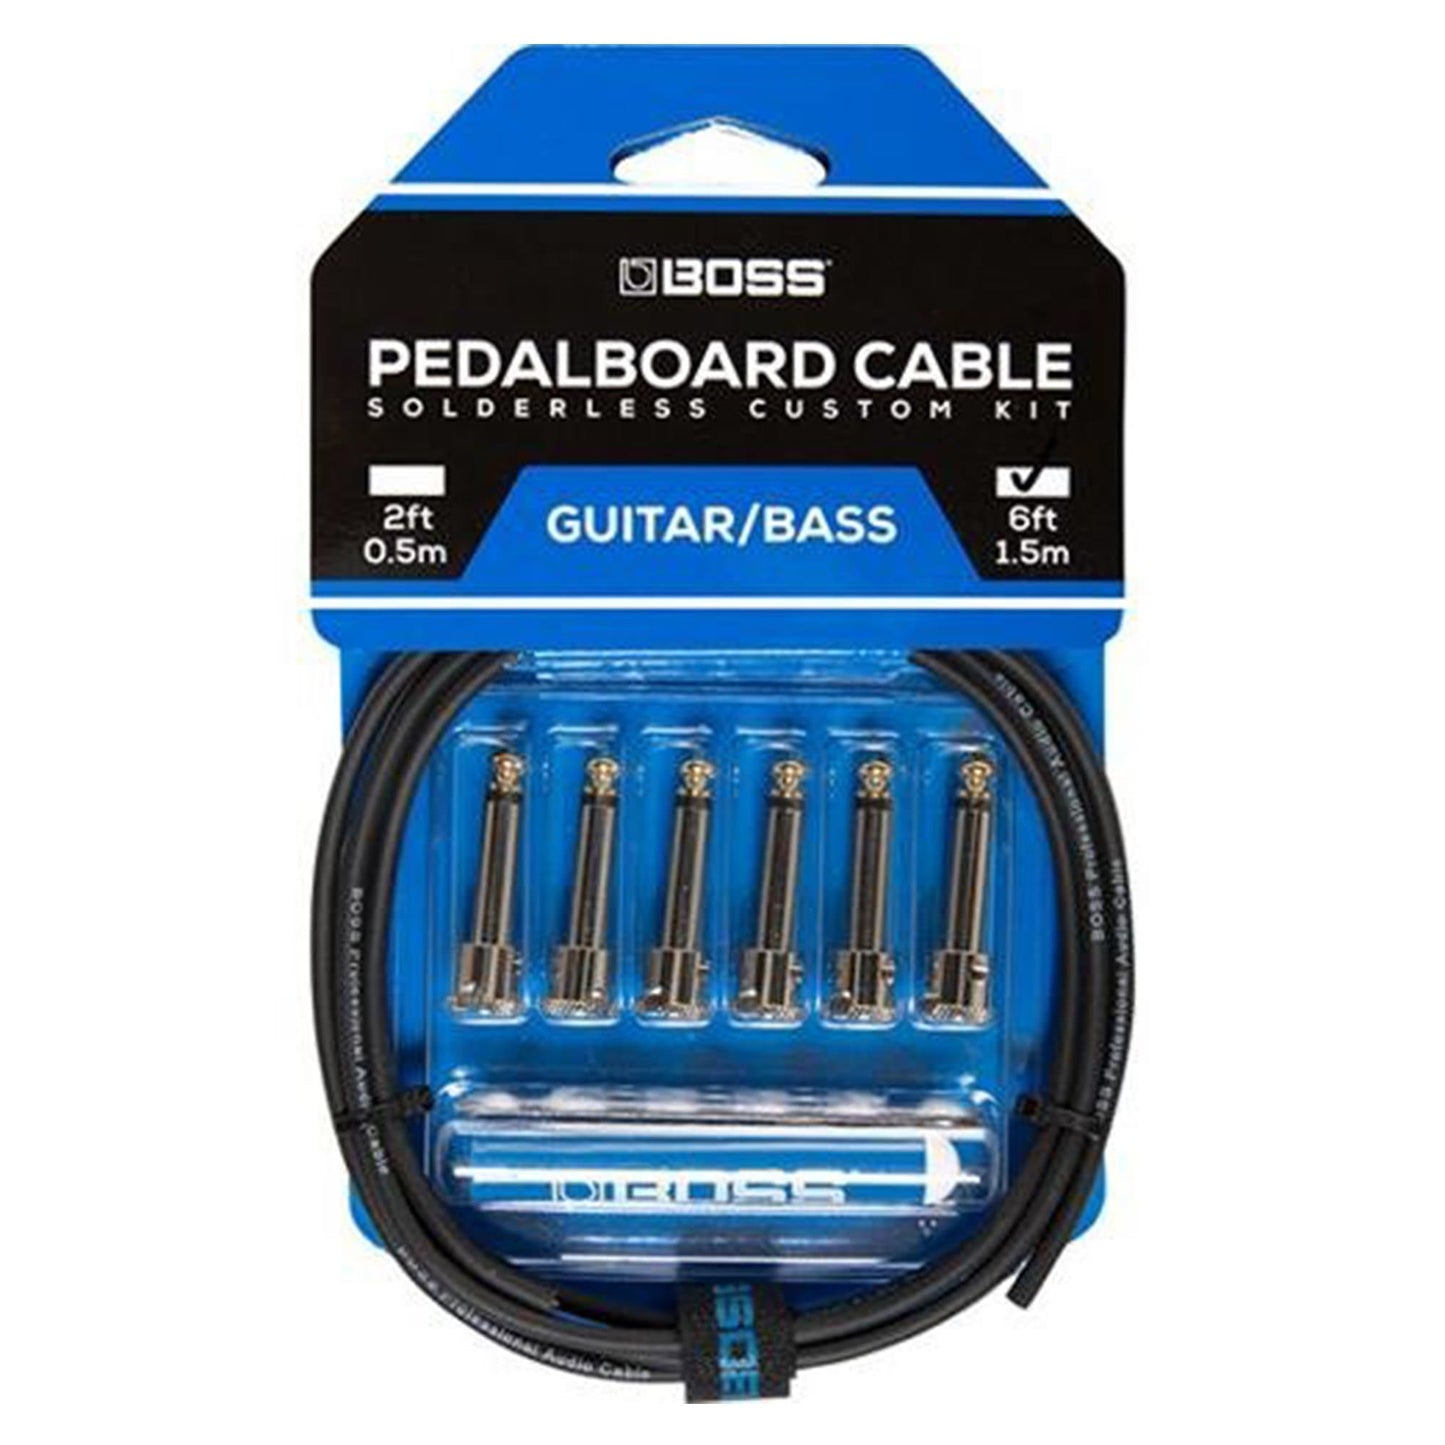 BOSS BCK-6 Solderless Pedalboard Cable Kit - 6 Connectors, 6 Feet Accessories / Cables